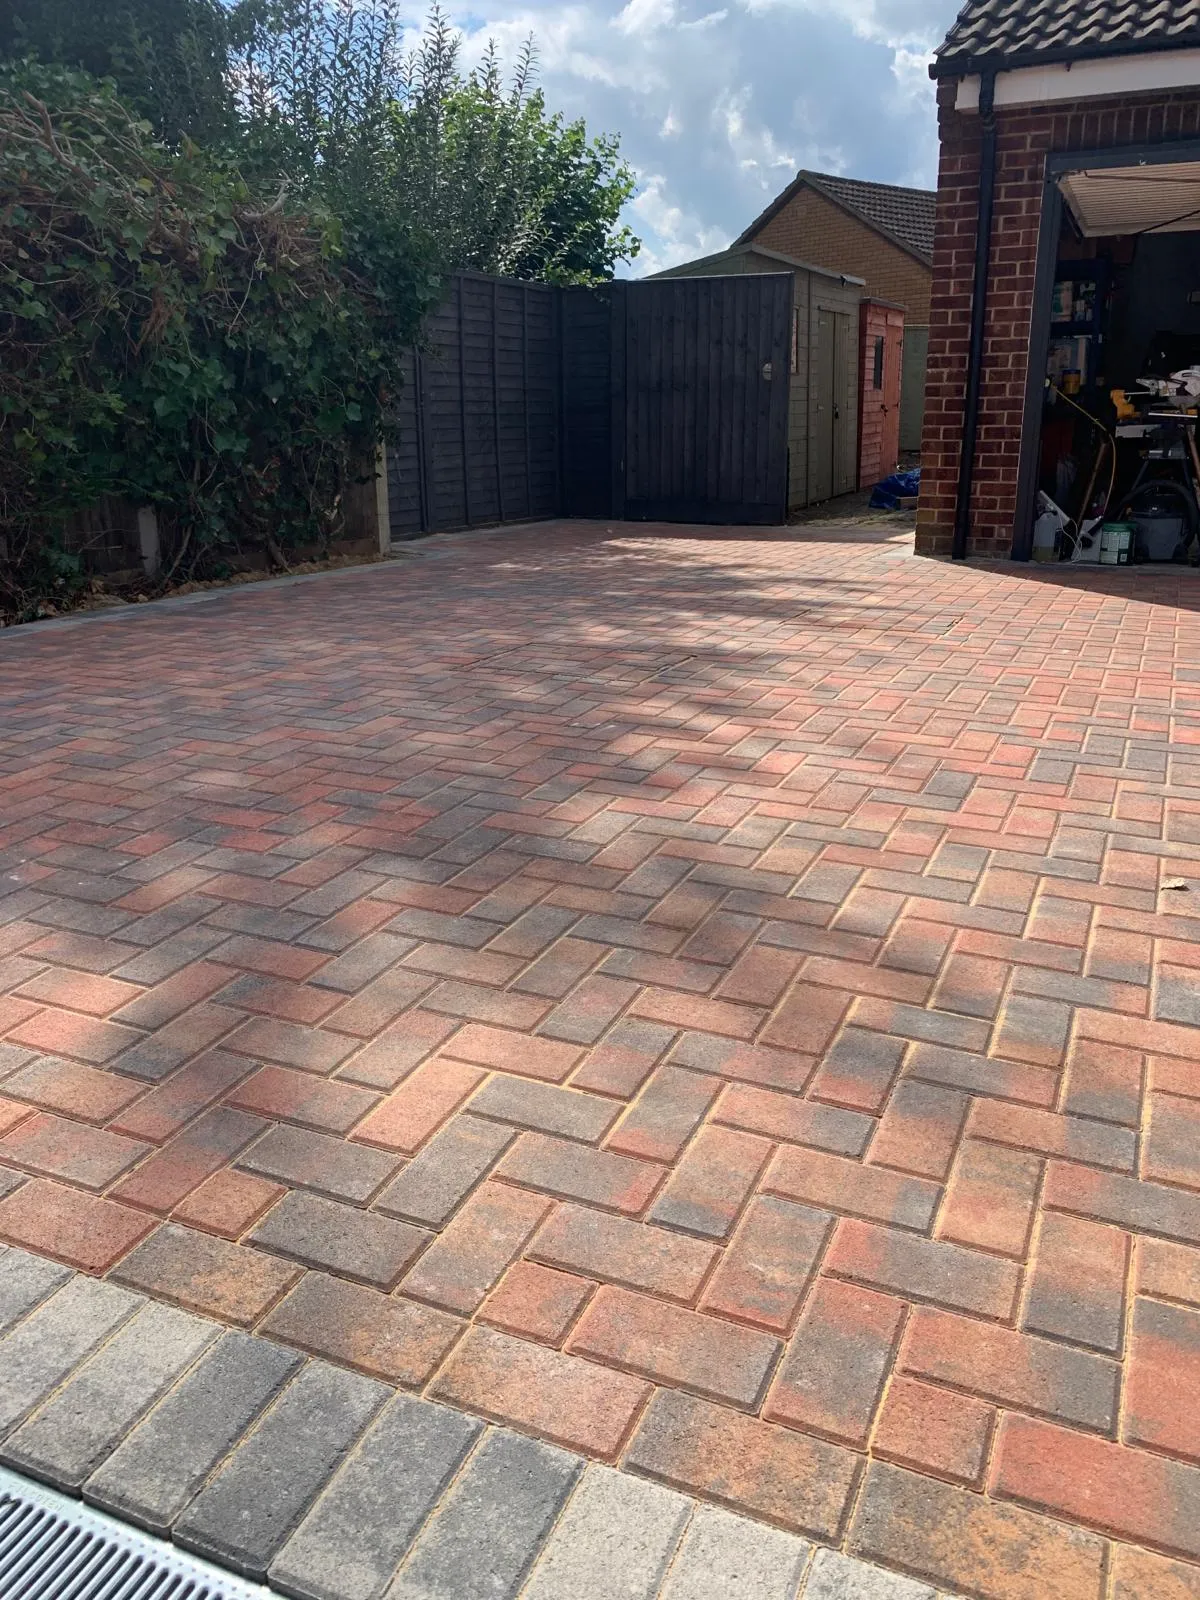 A brick driveway with a garage in the background.